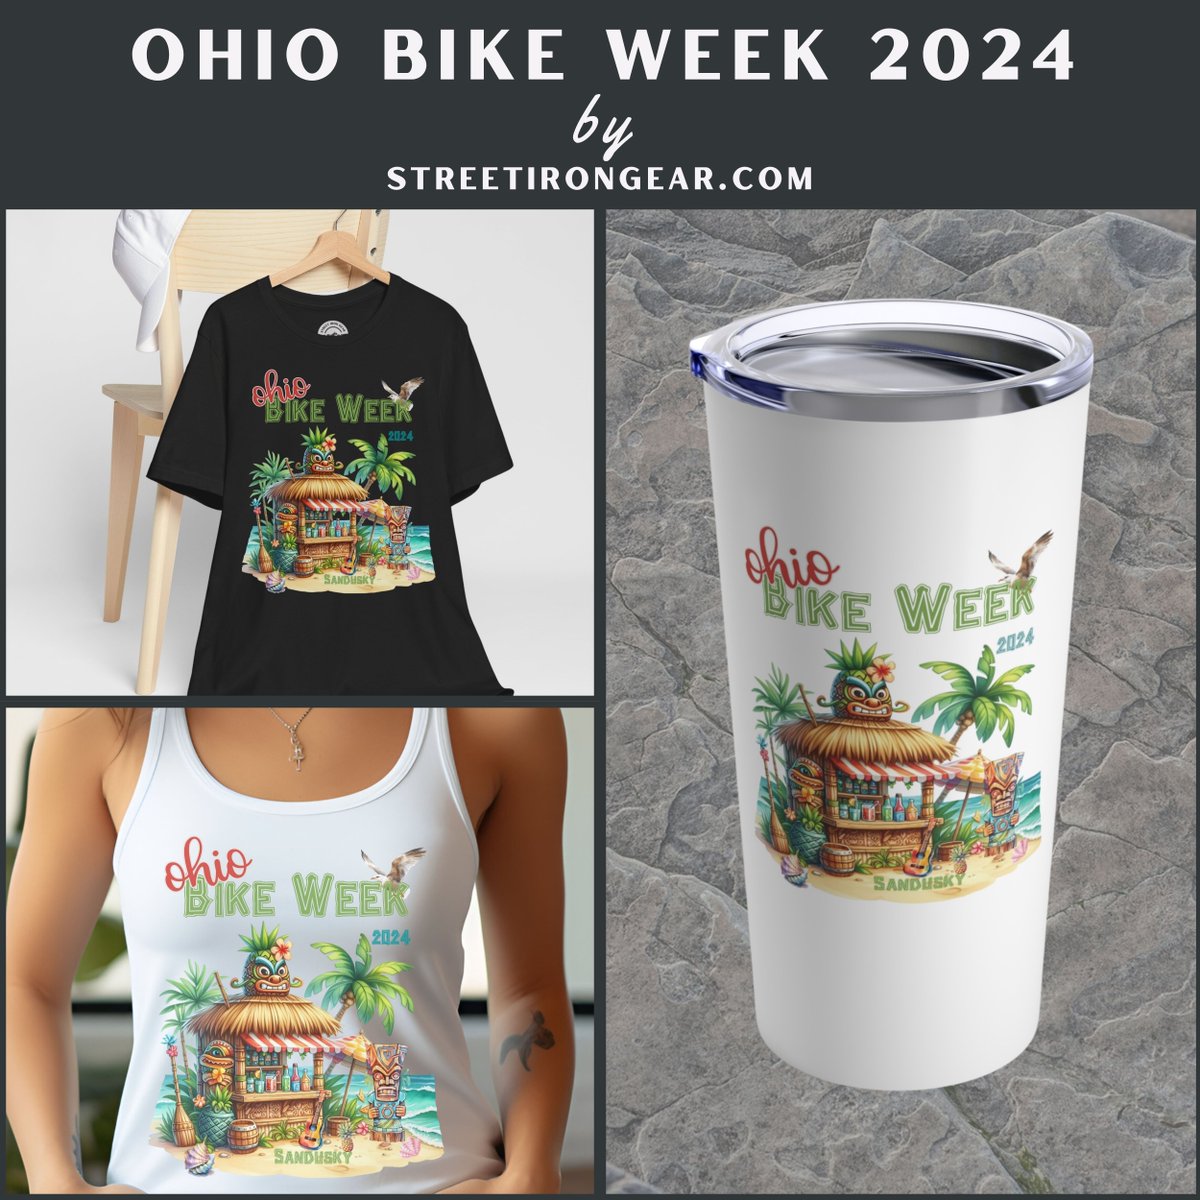 Dive into our latest collection of tees, tanks, and travel mugs for Ohio Bike Week 2024. Grab yours and let's make waves together! 🏍️🌺 #OhioBikeWeek2024 #TikiStyle #StreetIronGear #BikerLife #MotorcycleMerch #RideInStyle #BikeWeekReady 

Order today!
buff.ly/4aKTZzc